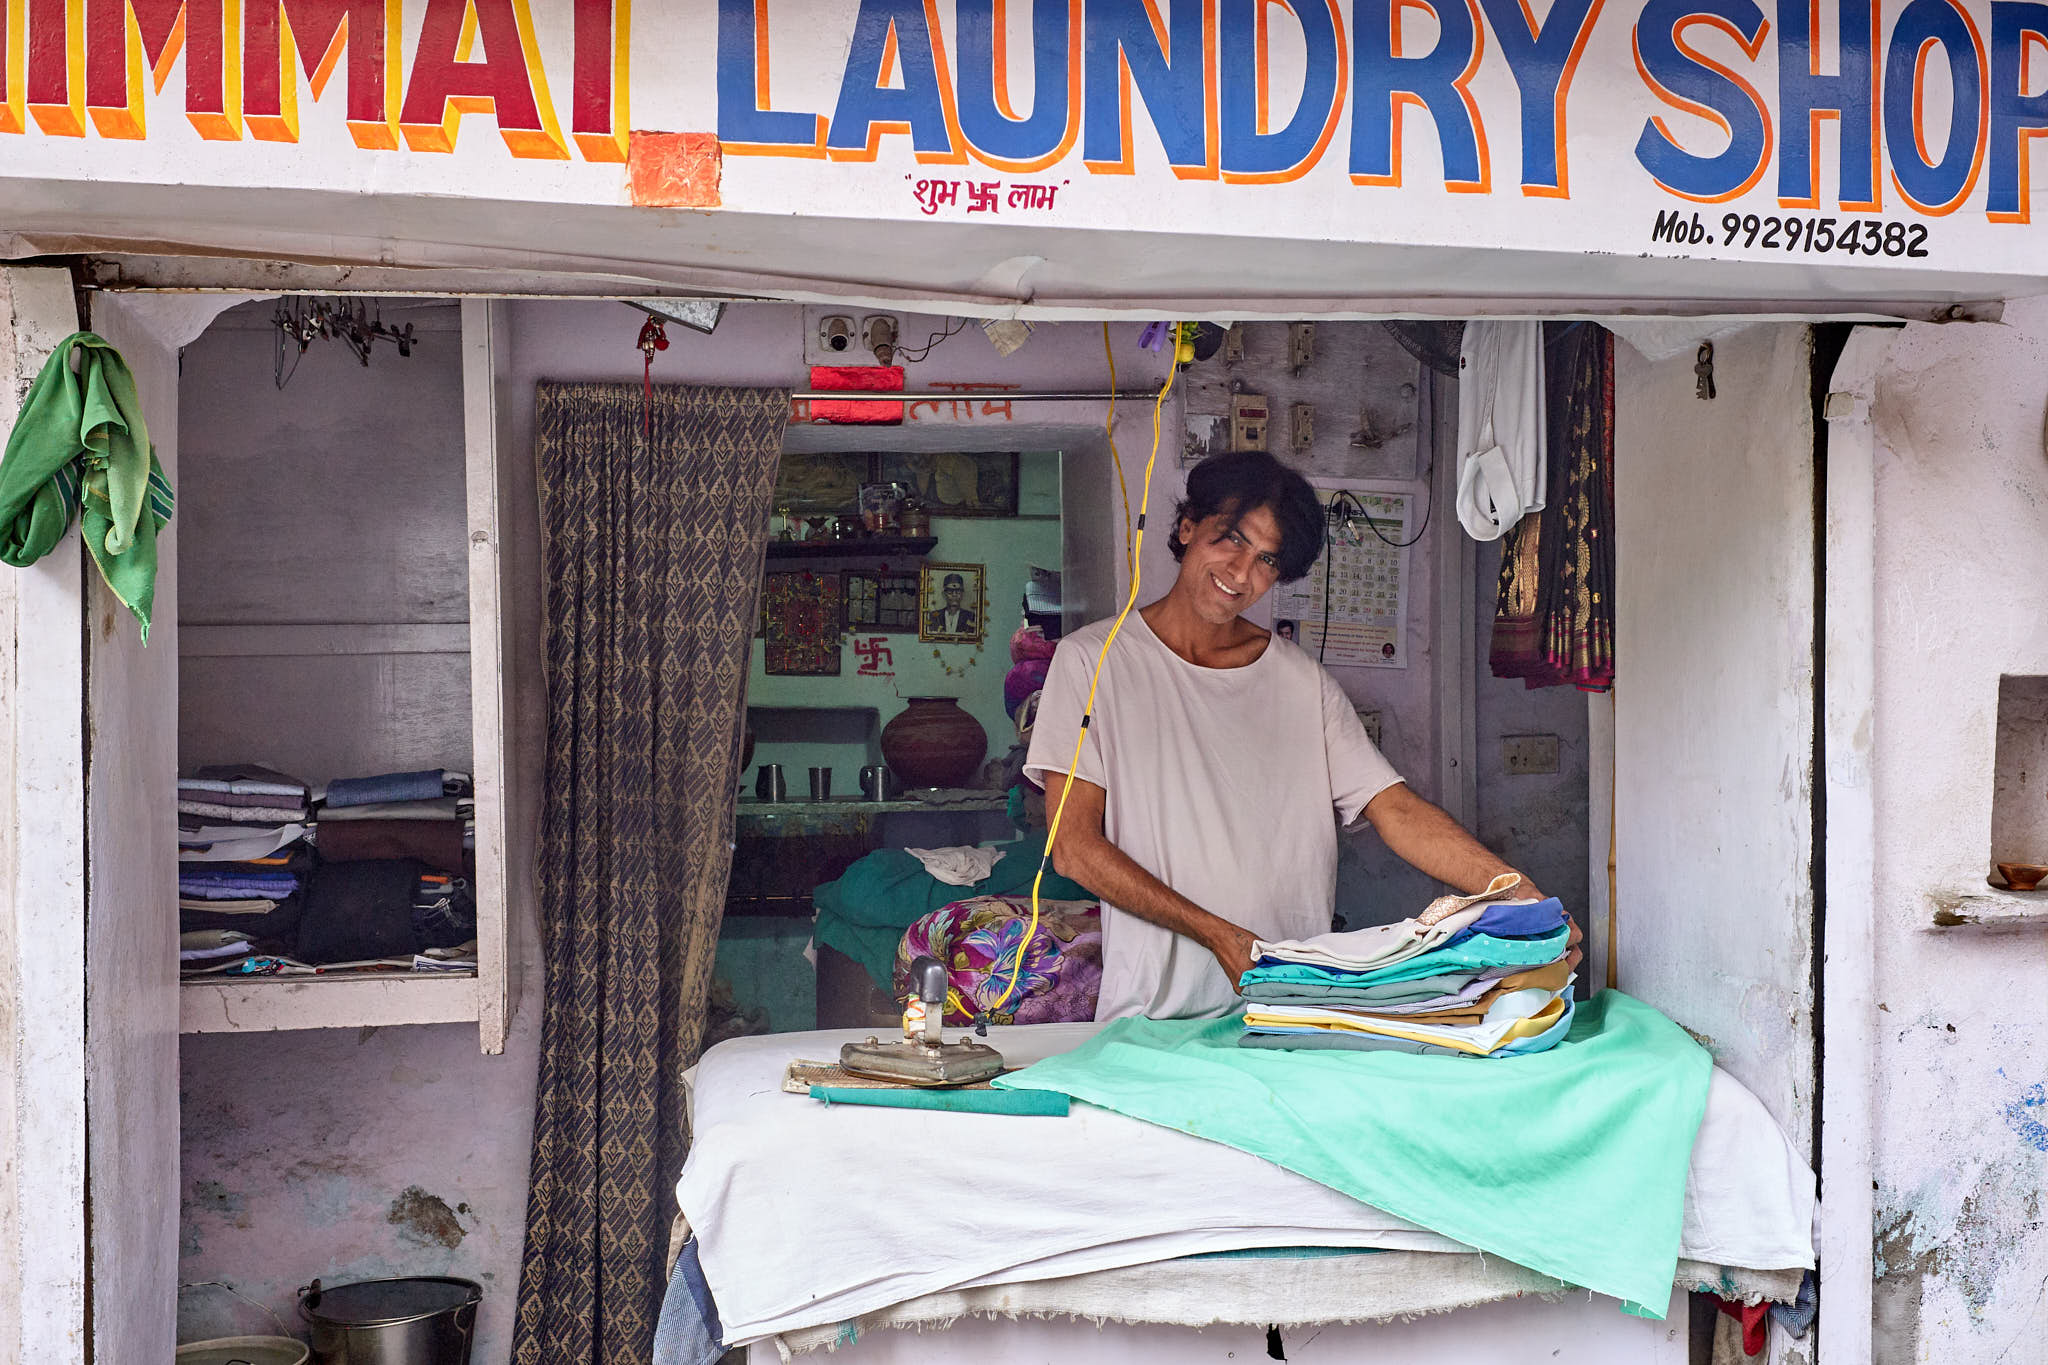 Laundry man in Udaipur, India; LEICA M10 35mm ISO-2000 1/60sec